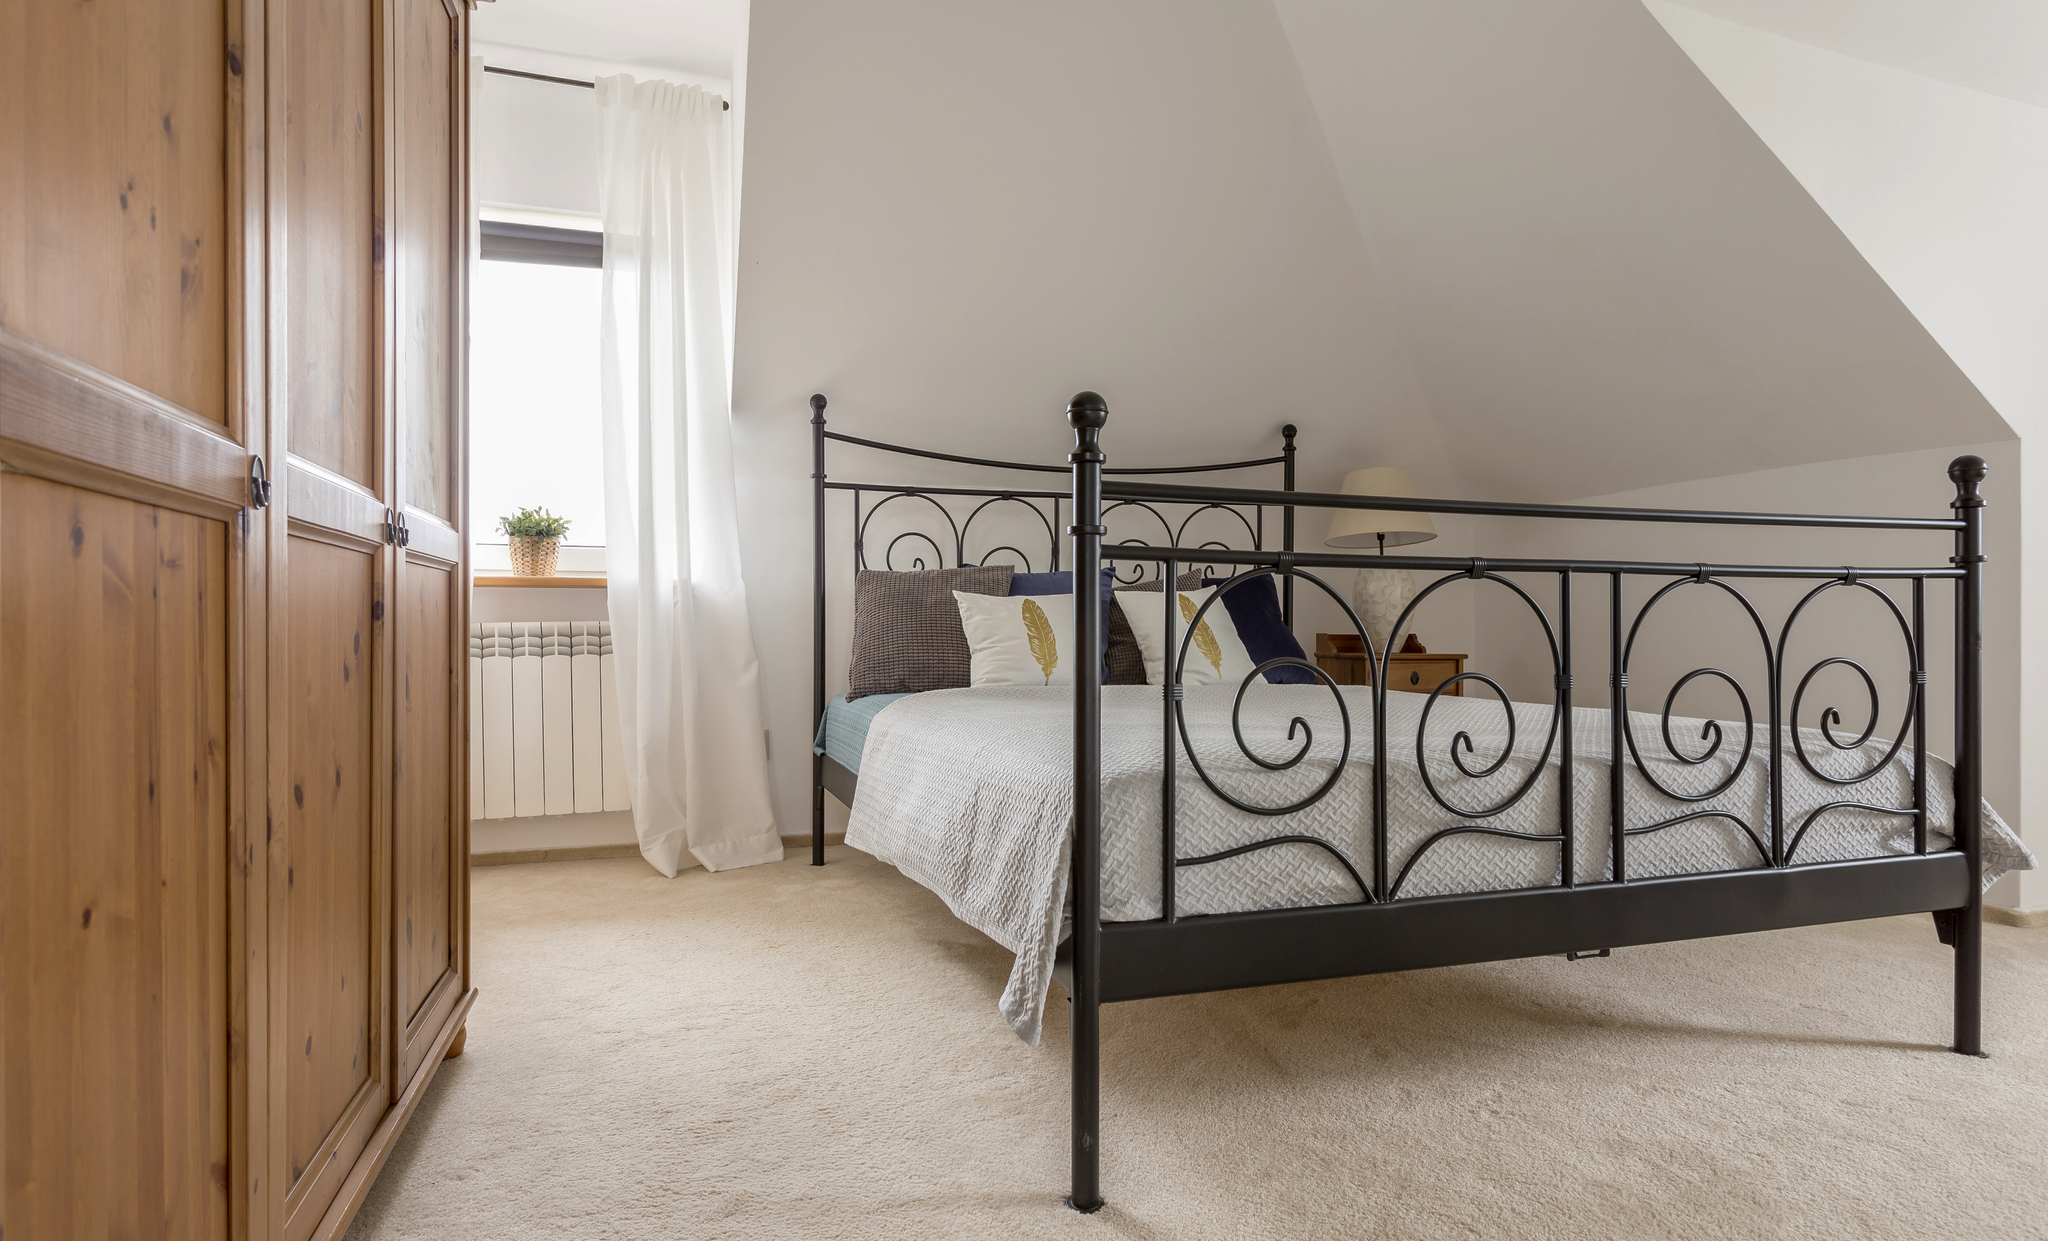 Should you choose a forged bed frame for your bedroom